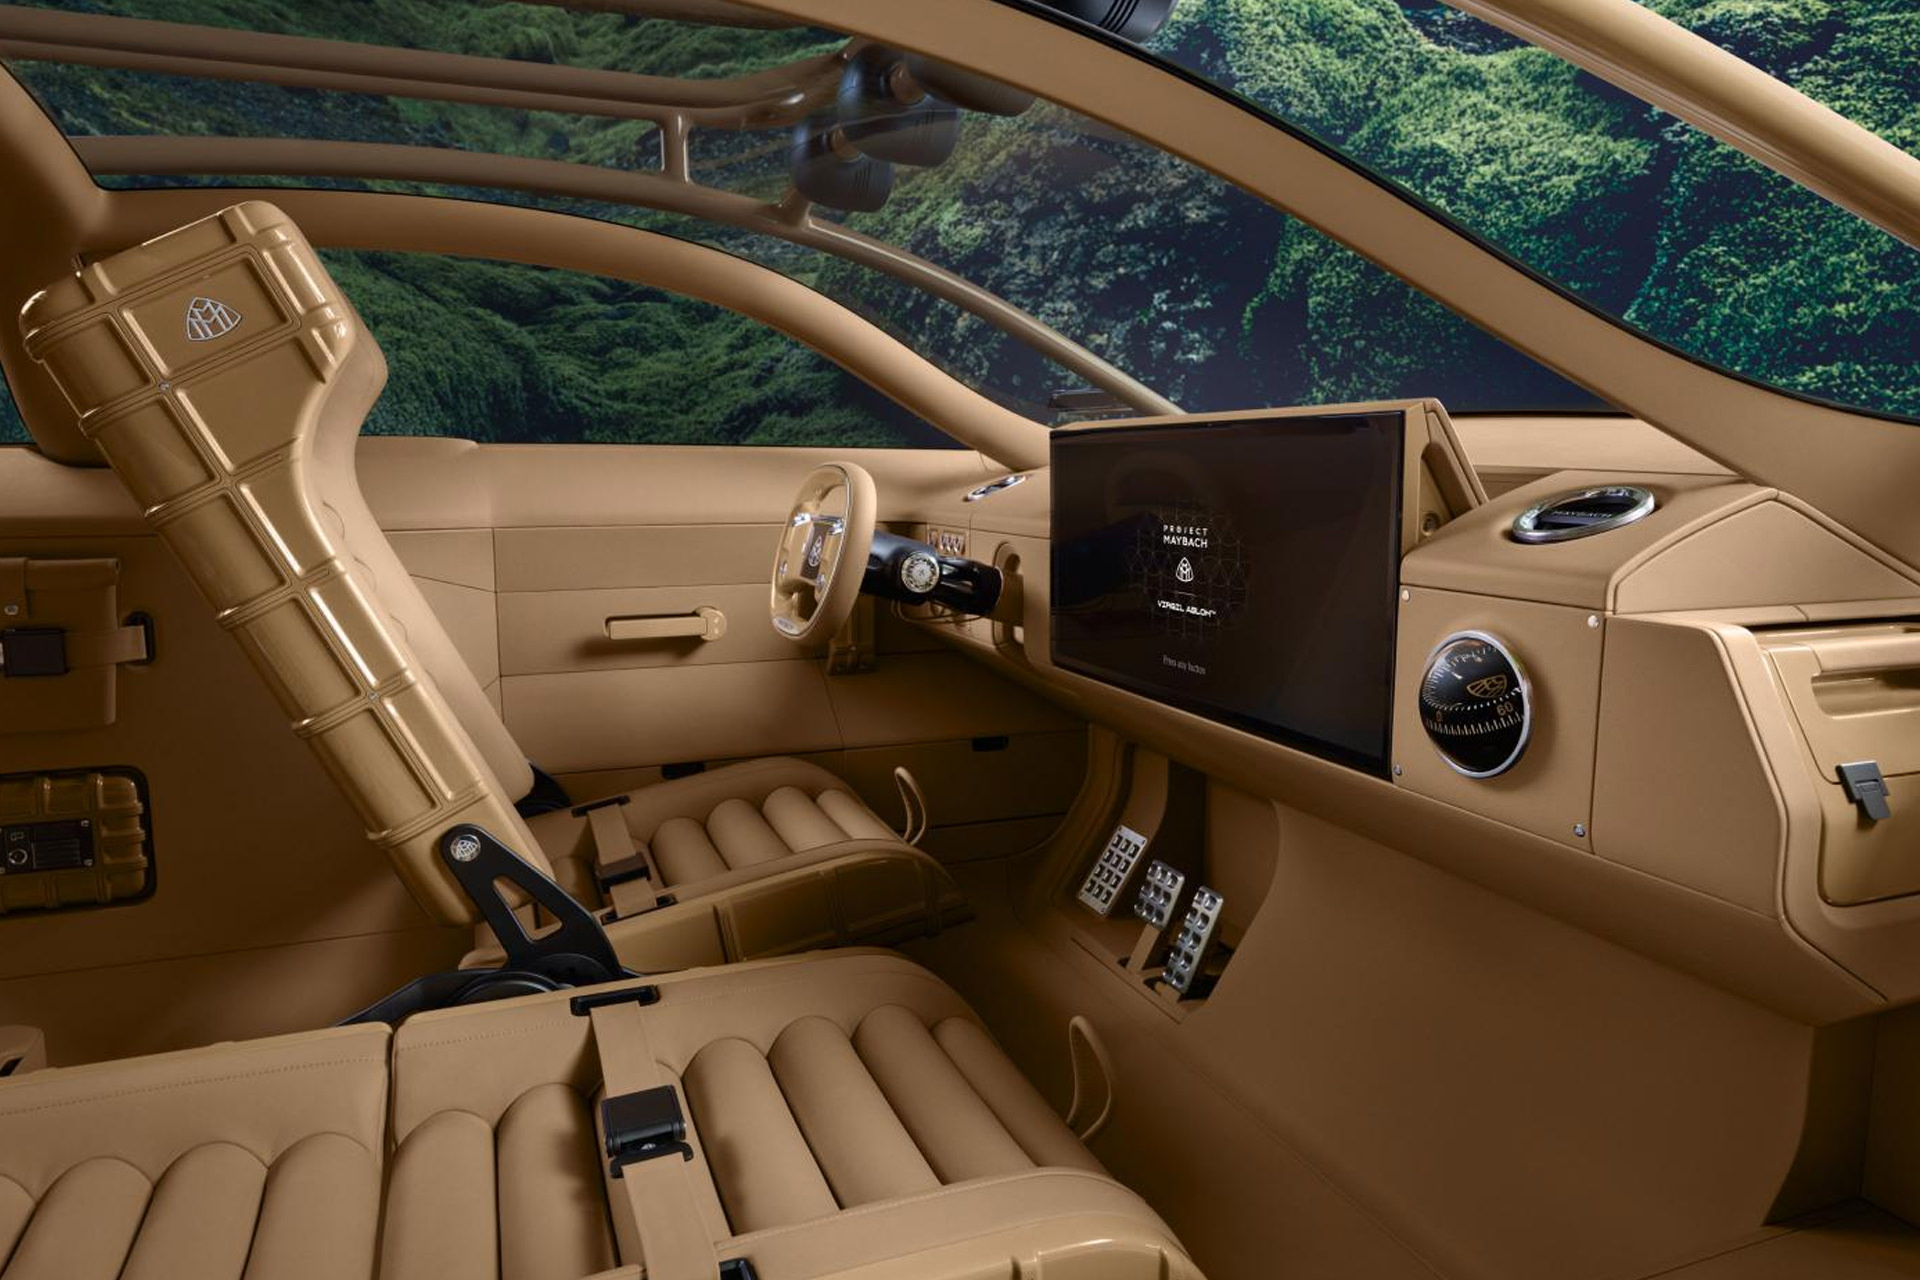 Interior view of the Mercedes-Benz Maybach project